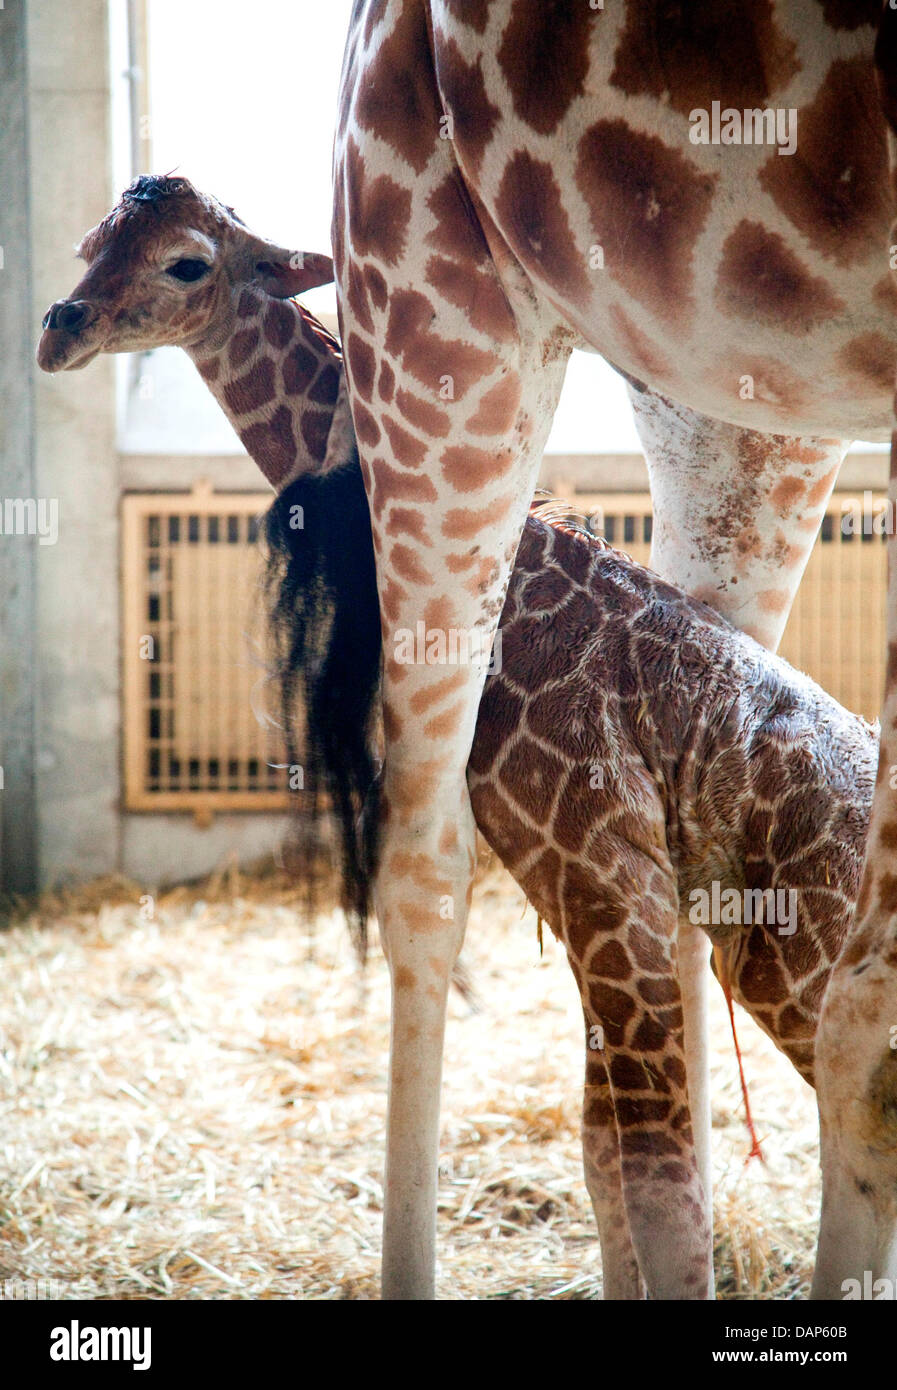 Protected by its mother 'Diana', the female giraffe baby 'Nanji' stands shortly after its birth at the zoo in Osnabrueck, Germany, 20 July 2011. 'Nanji' spends her days in the stall with its mother, mainly sleeping and feeding, and in a few weeks, she will be allowed out in the giraffe enclosure. Meanwhile, 'Nanji' is already 1.70 meters tall and weighs 50 kilograms. Photo: Zoo Osn Stock Photo